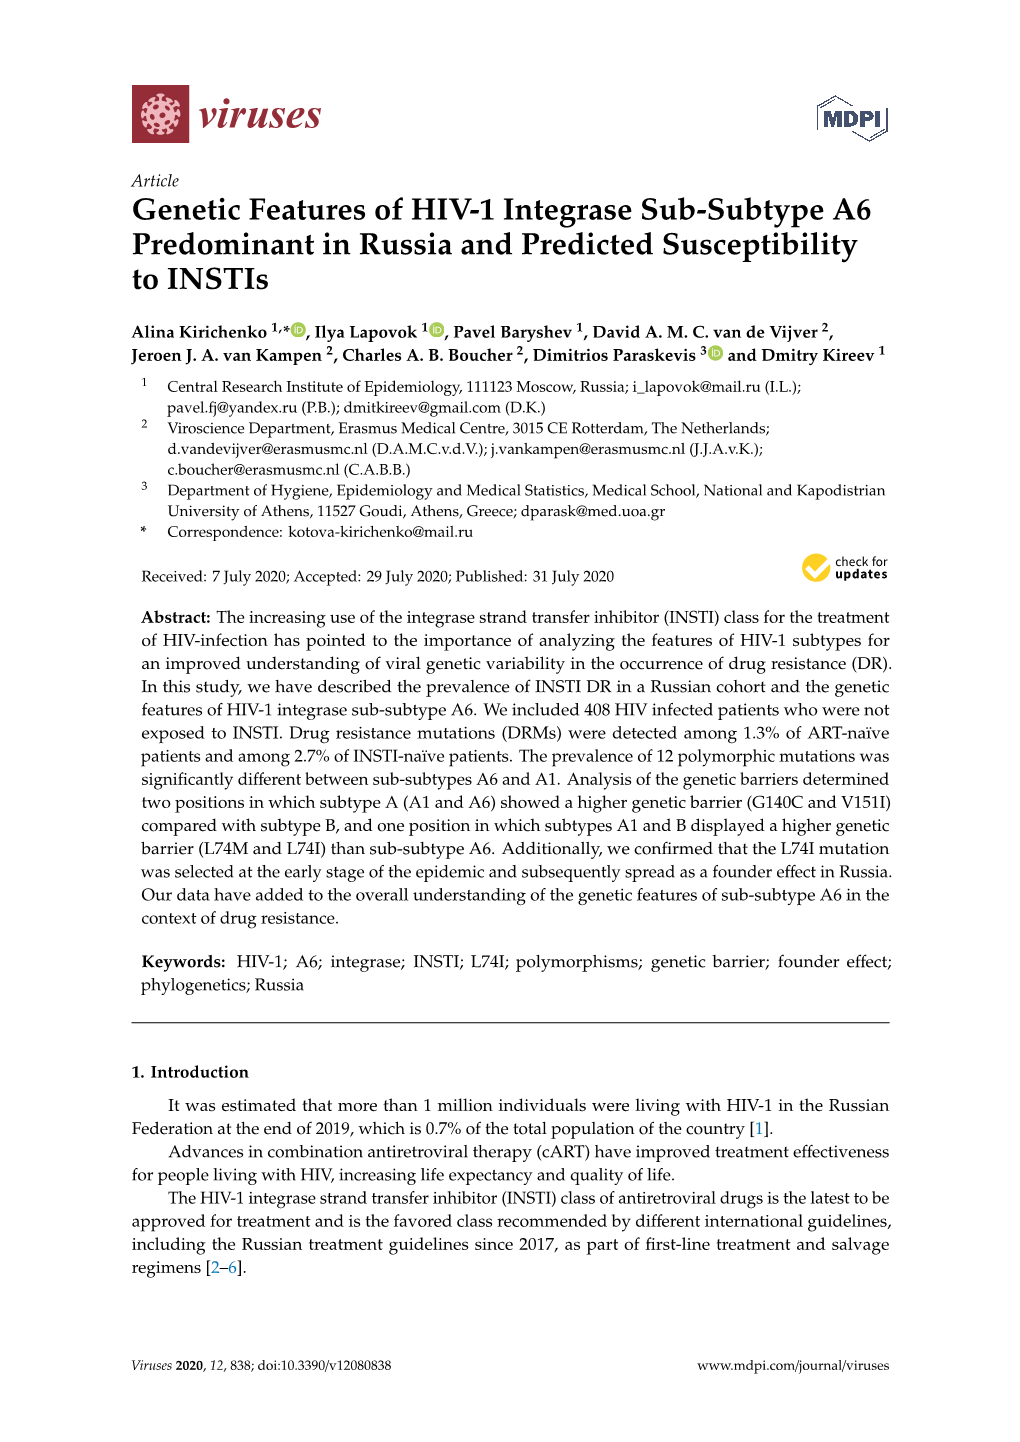 Genetic Features of HIV-1 Integrase Sub-Subtype A6 Predominant in Russia and Predicted Susceptibility to Instis